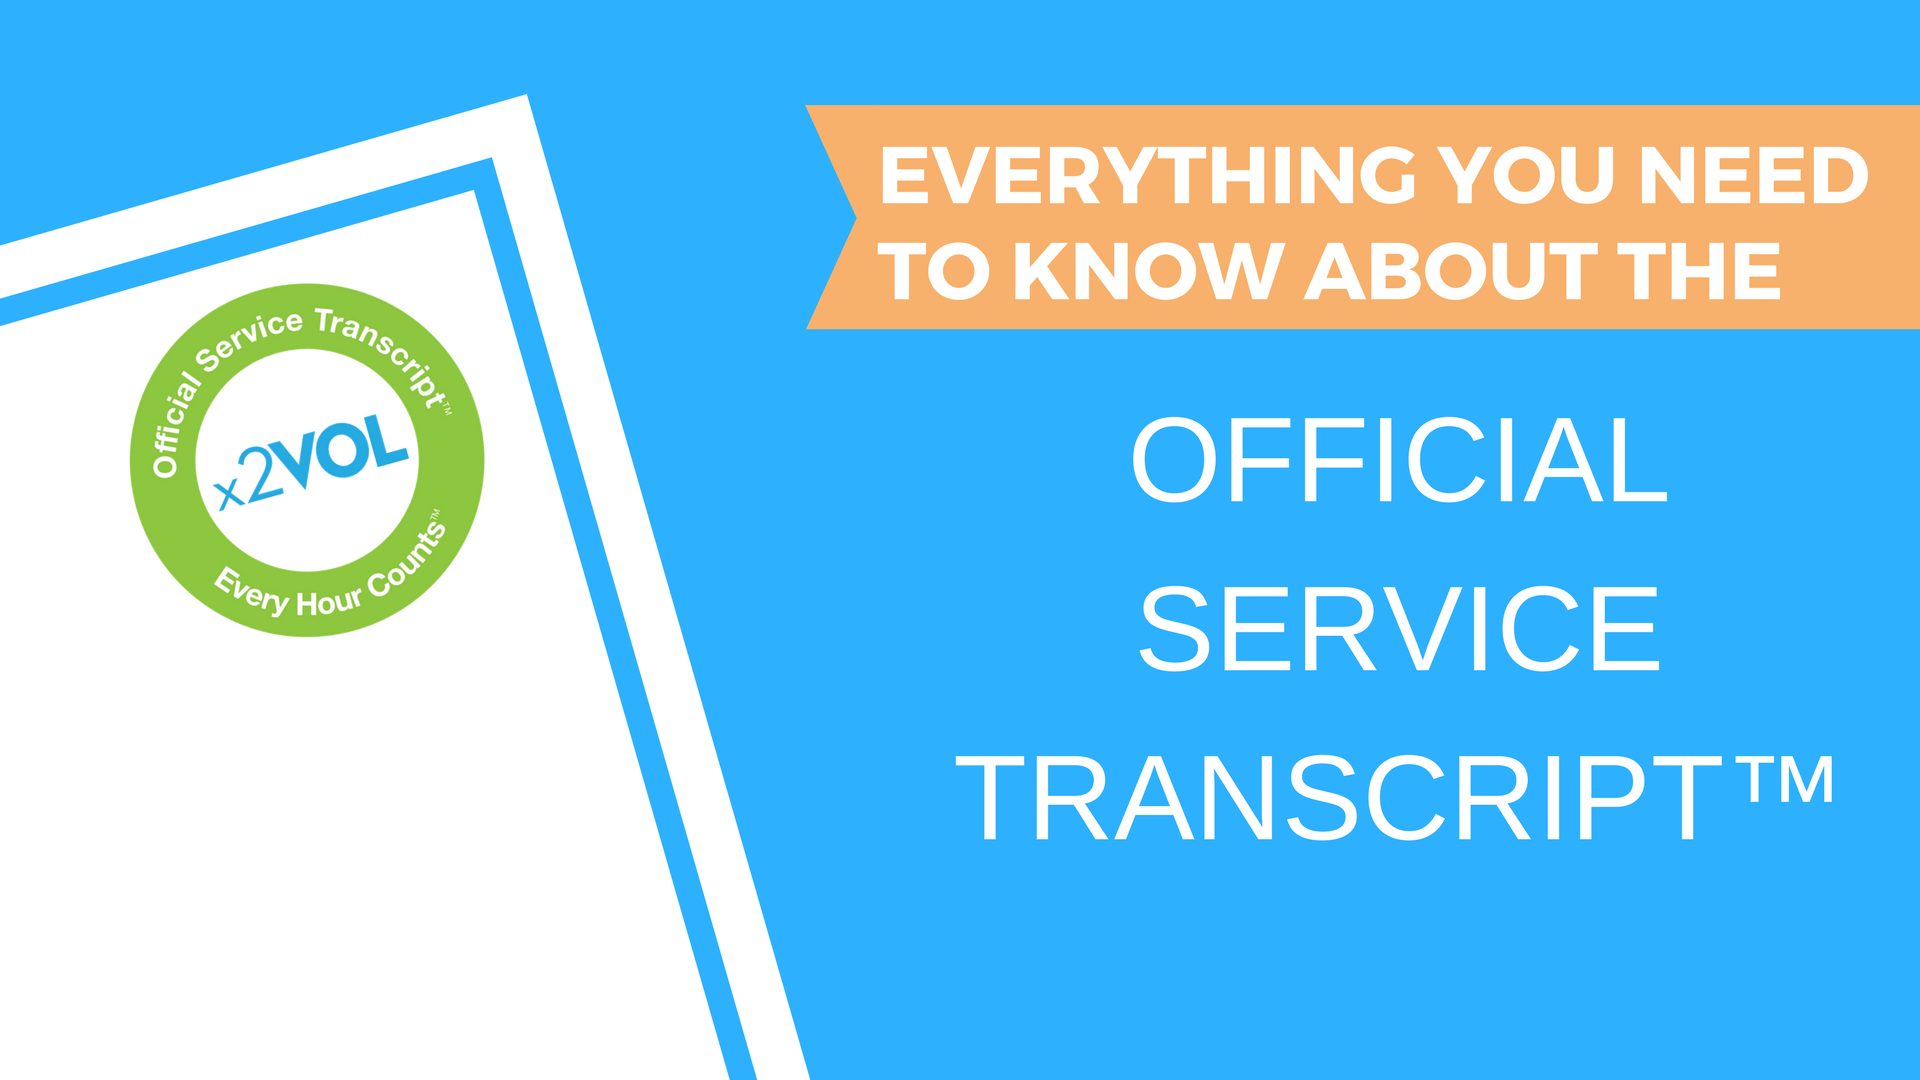 Frequently Asked Questions about the Official Service Transcript